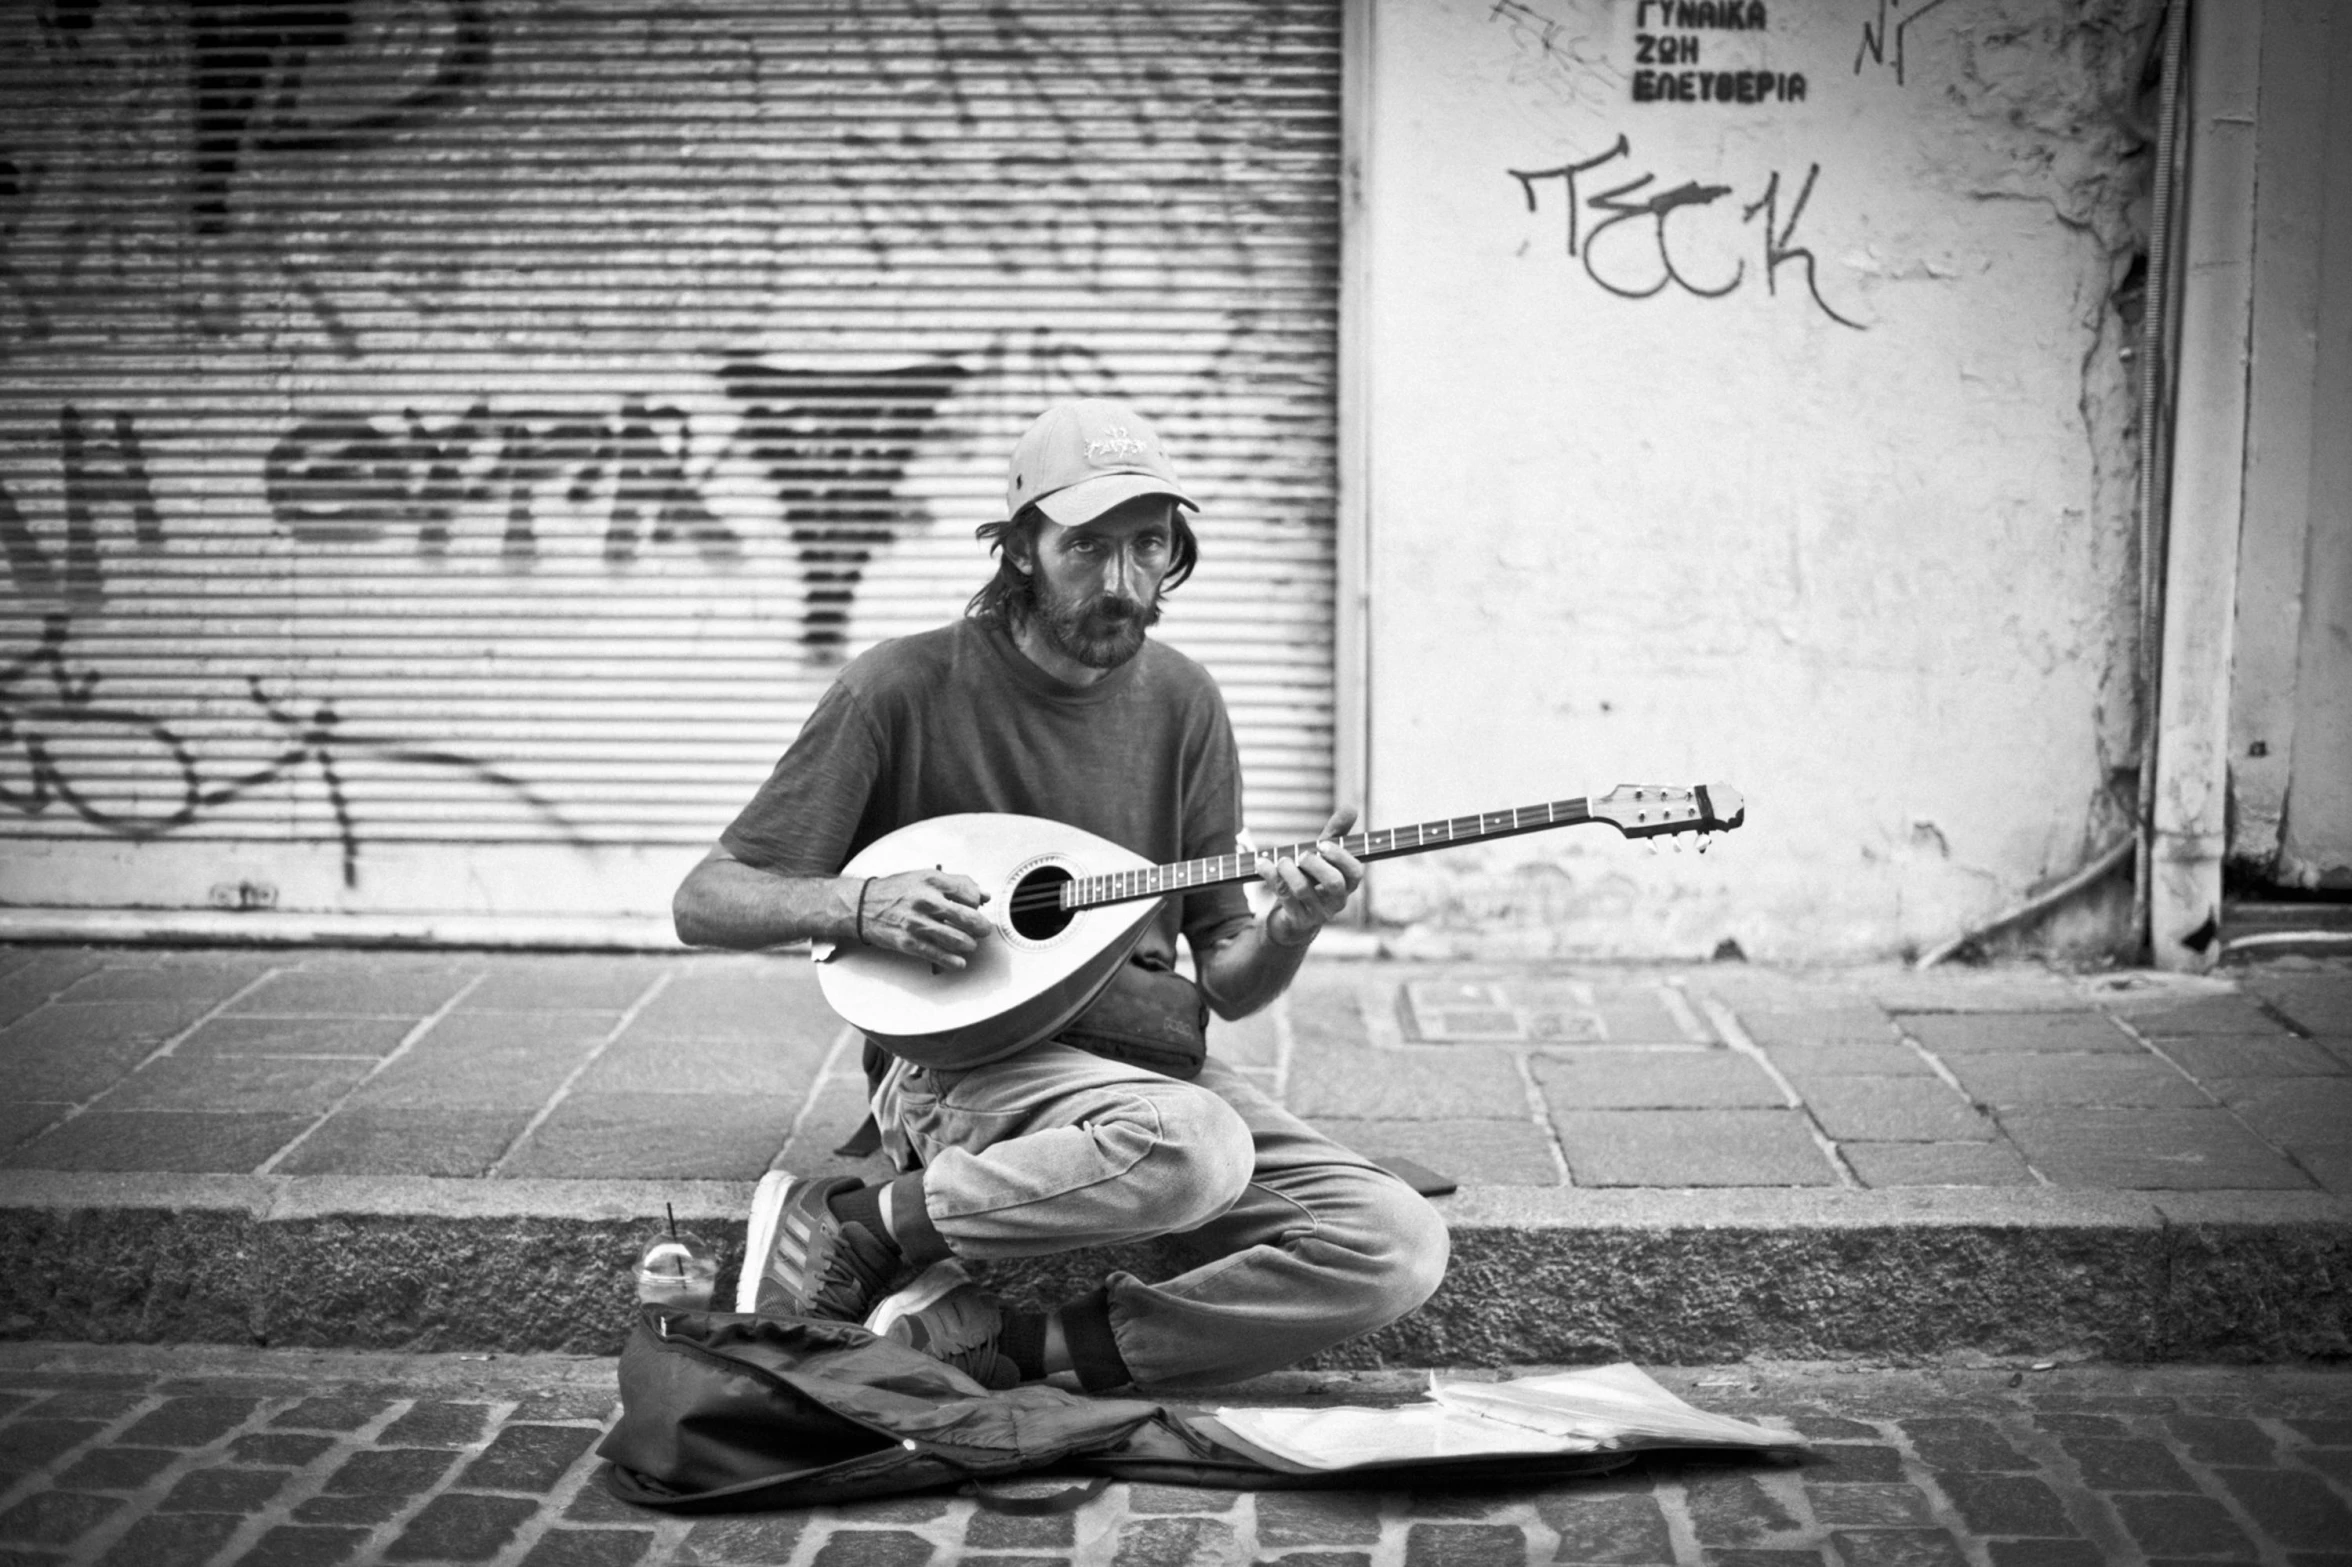 a person is playing a small guitar on a city street